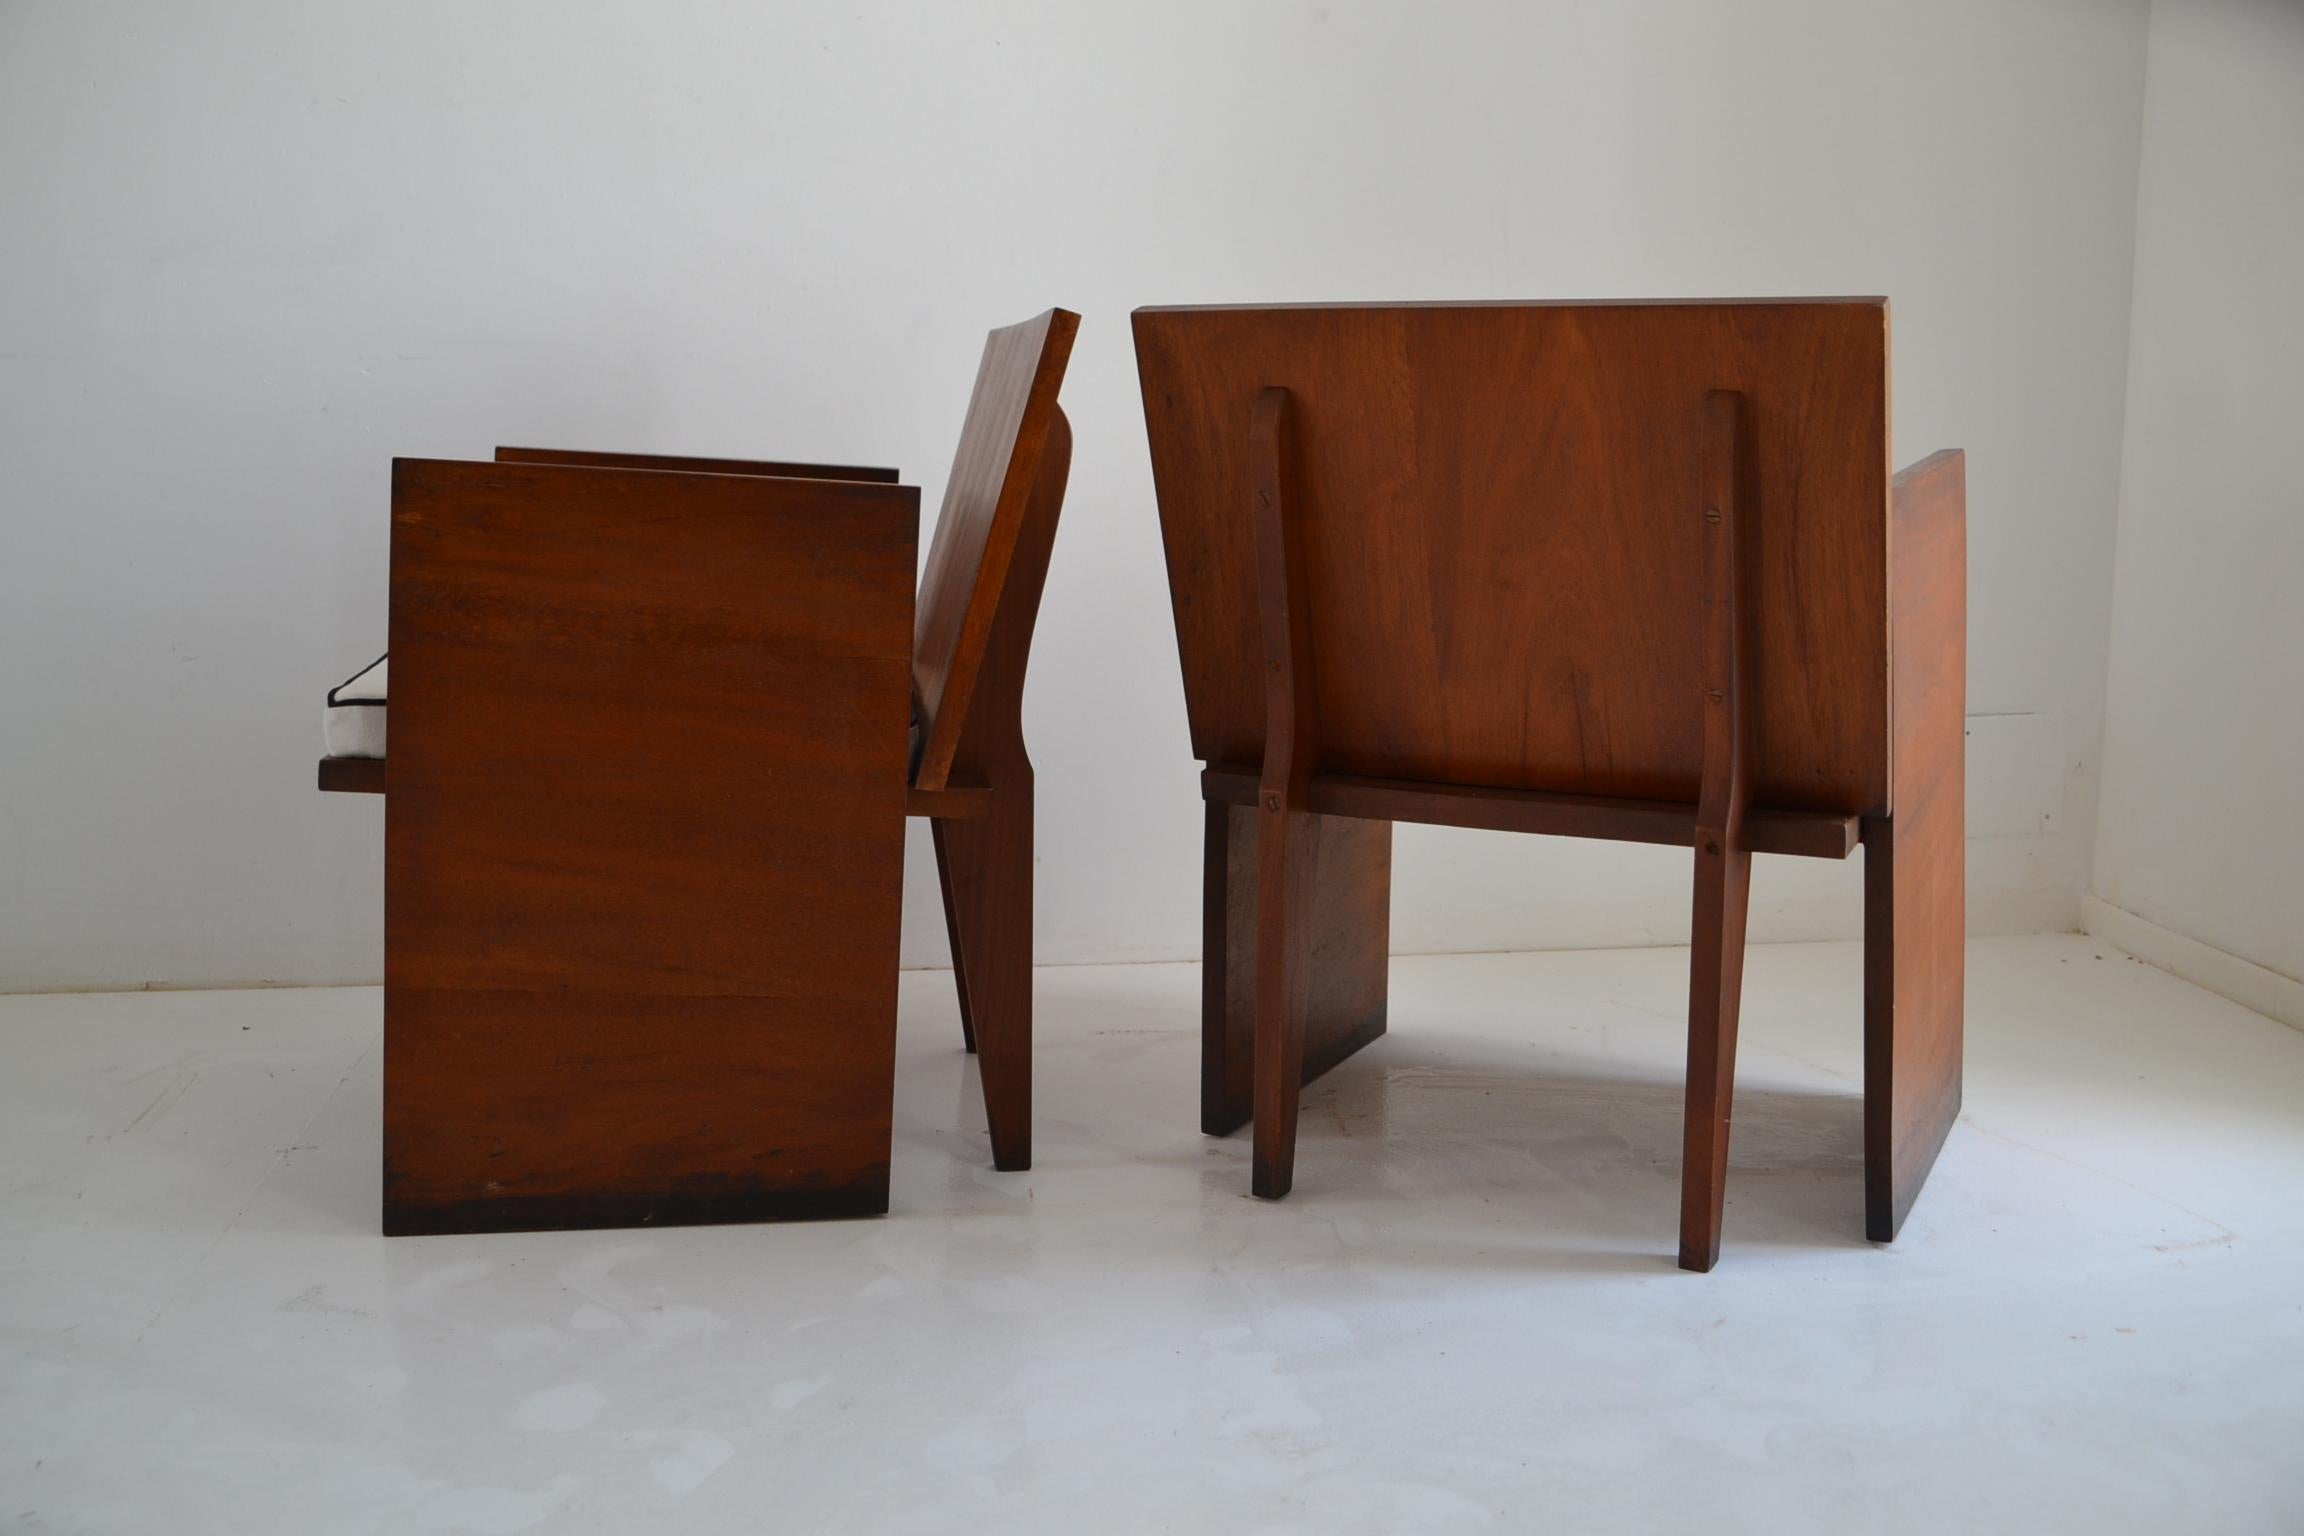 This pair of modernist armchairs is amazing of modernity and creativity! The designer is not identified, but it is a real piece from the modernist period. The wood is a very dense and heavy massive mahogany. The wood was worked by hand and not by